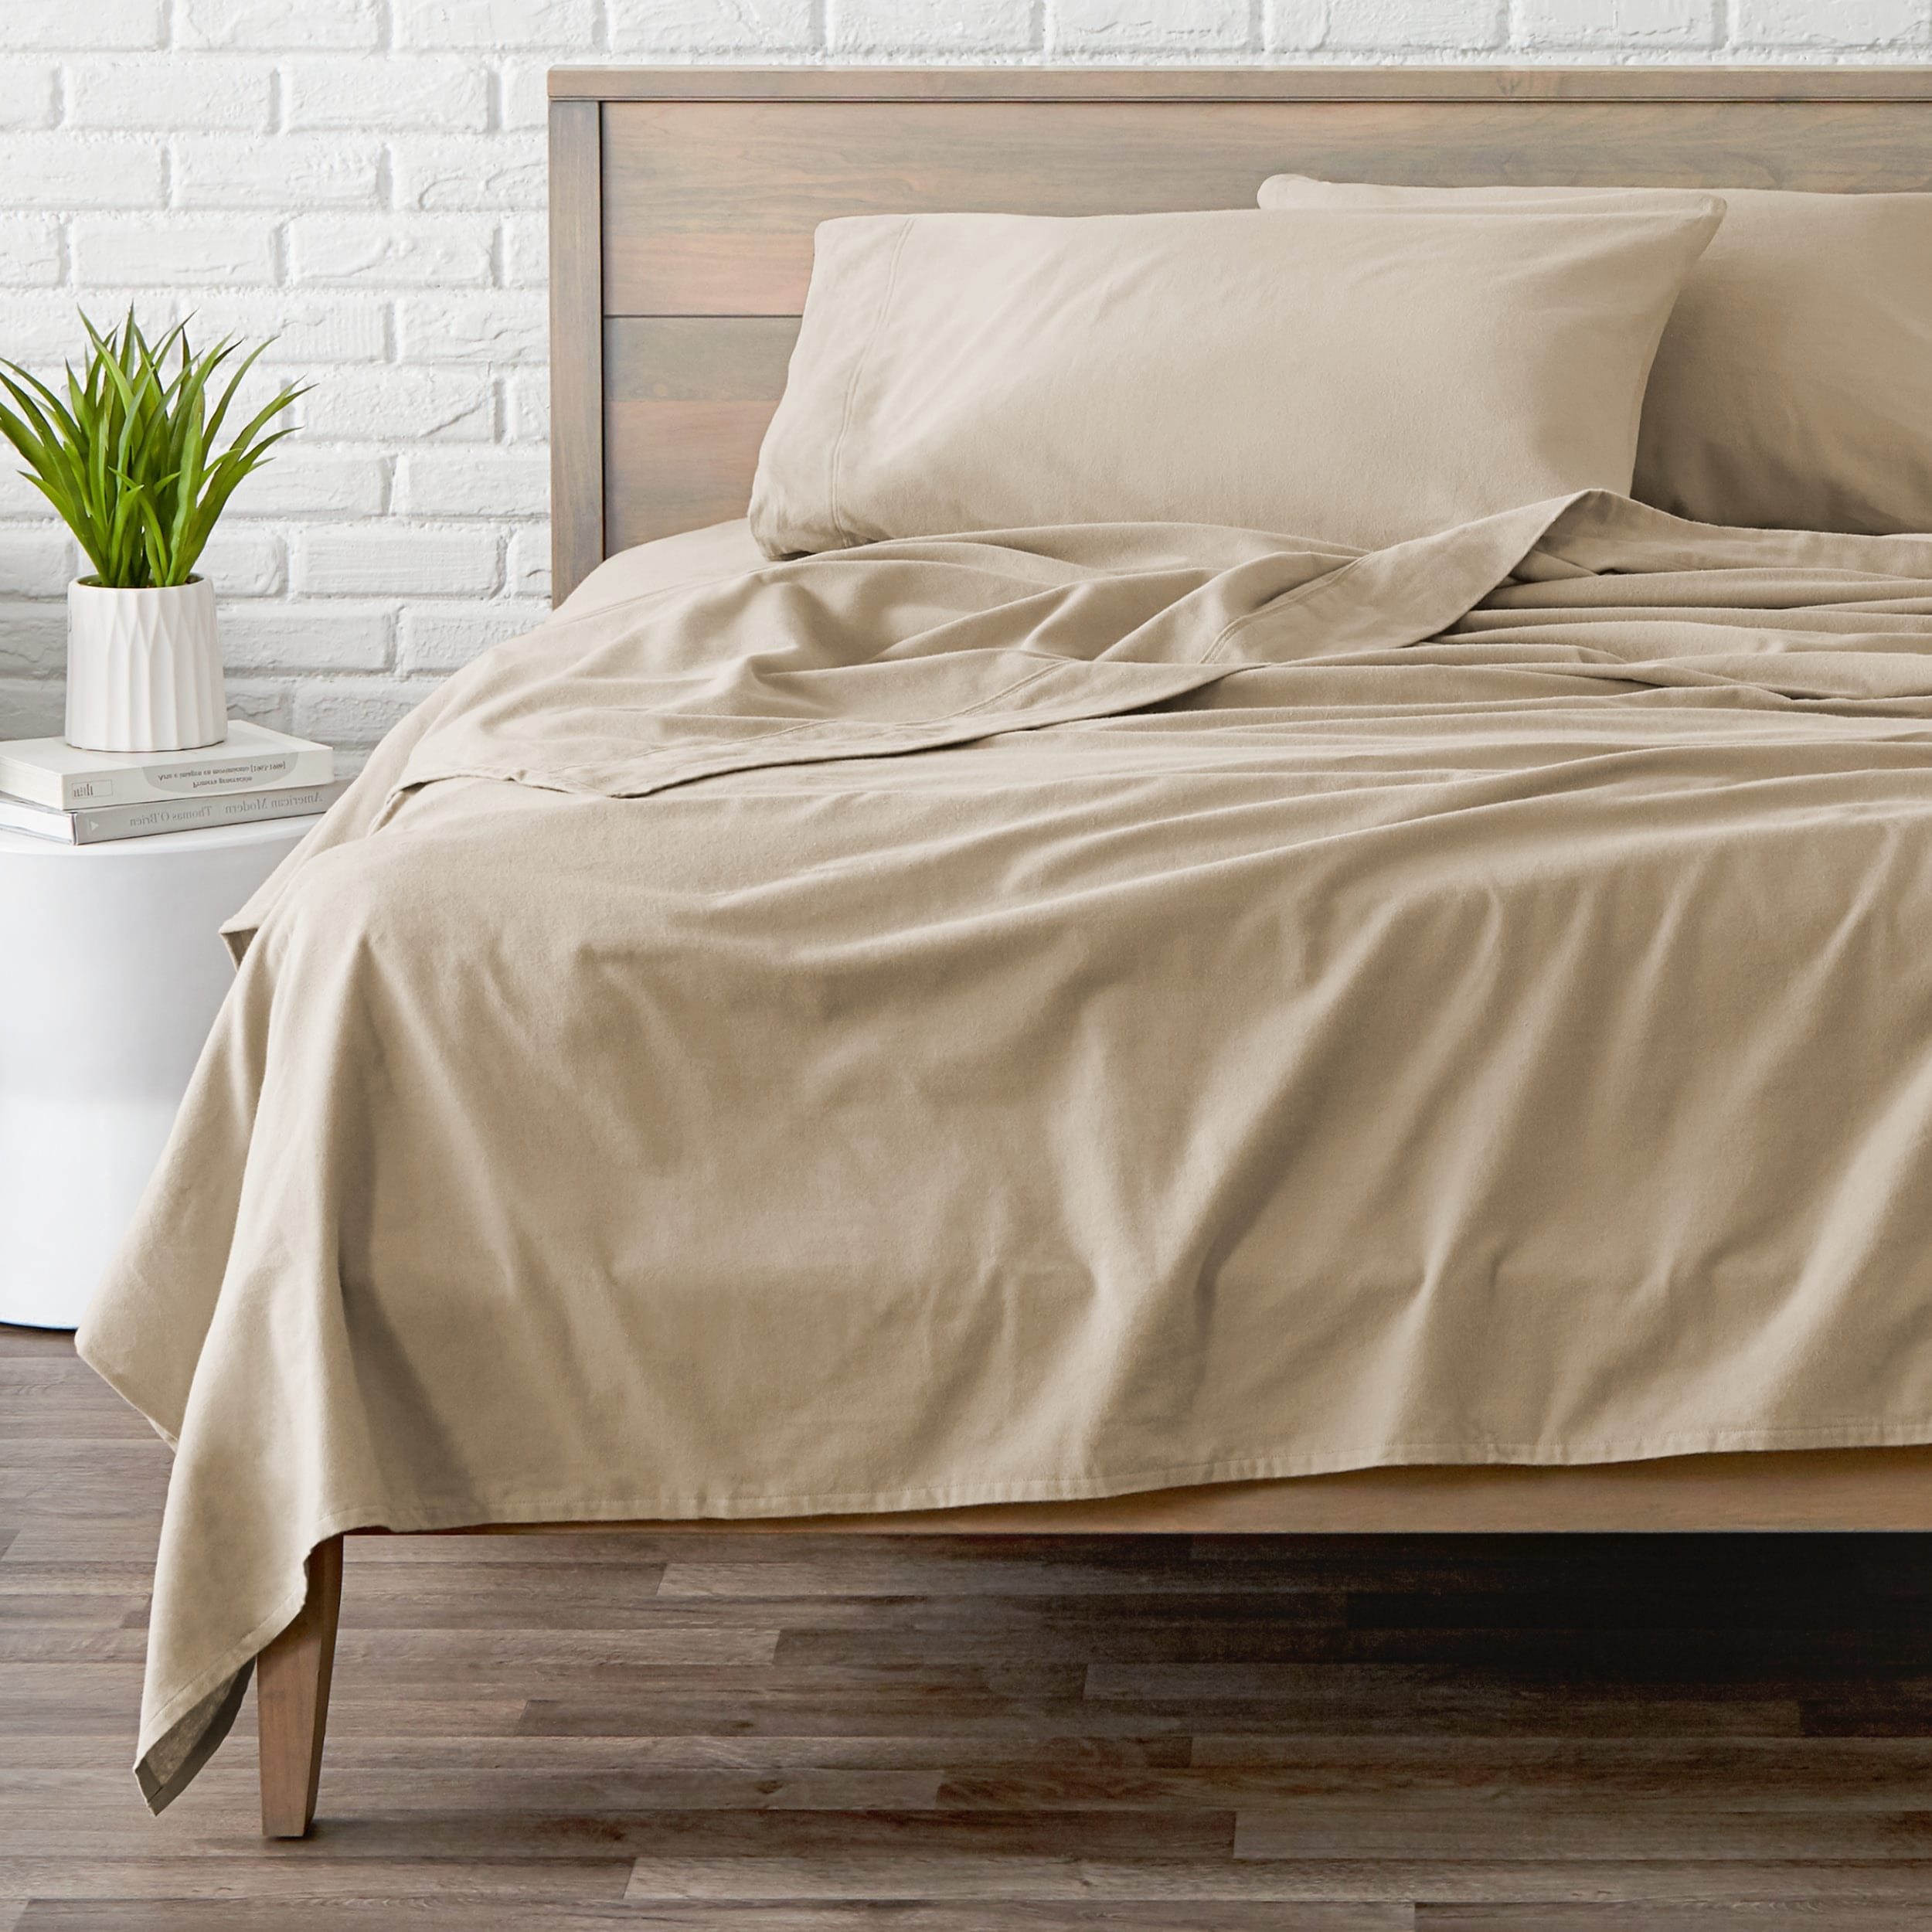 https://ak1.ostkcdn.com/images/products/is/images/direct/9a0e4543868eb75cbe1c905396ba09dc0fb93134/Bare-Home-Cotton-Flannel-Sheet-Set---Velvety-Soft-Heavyweight.jpg